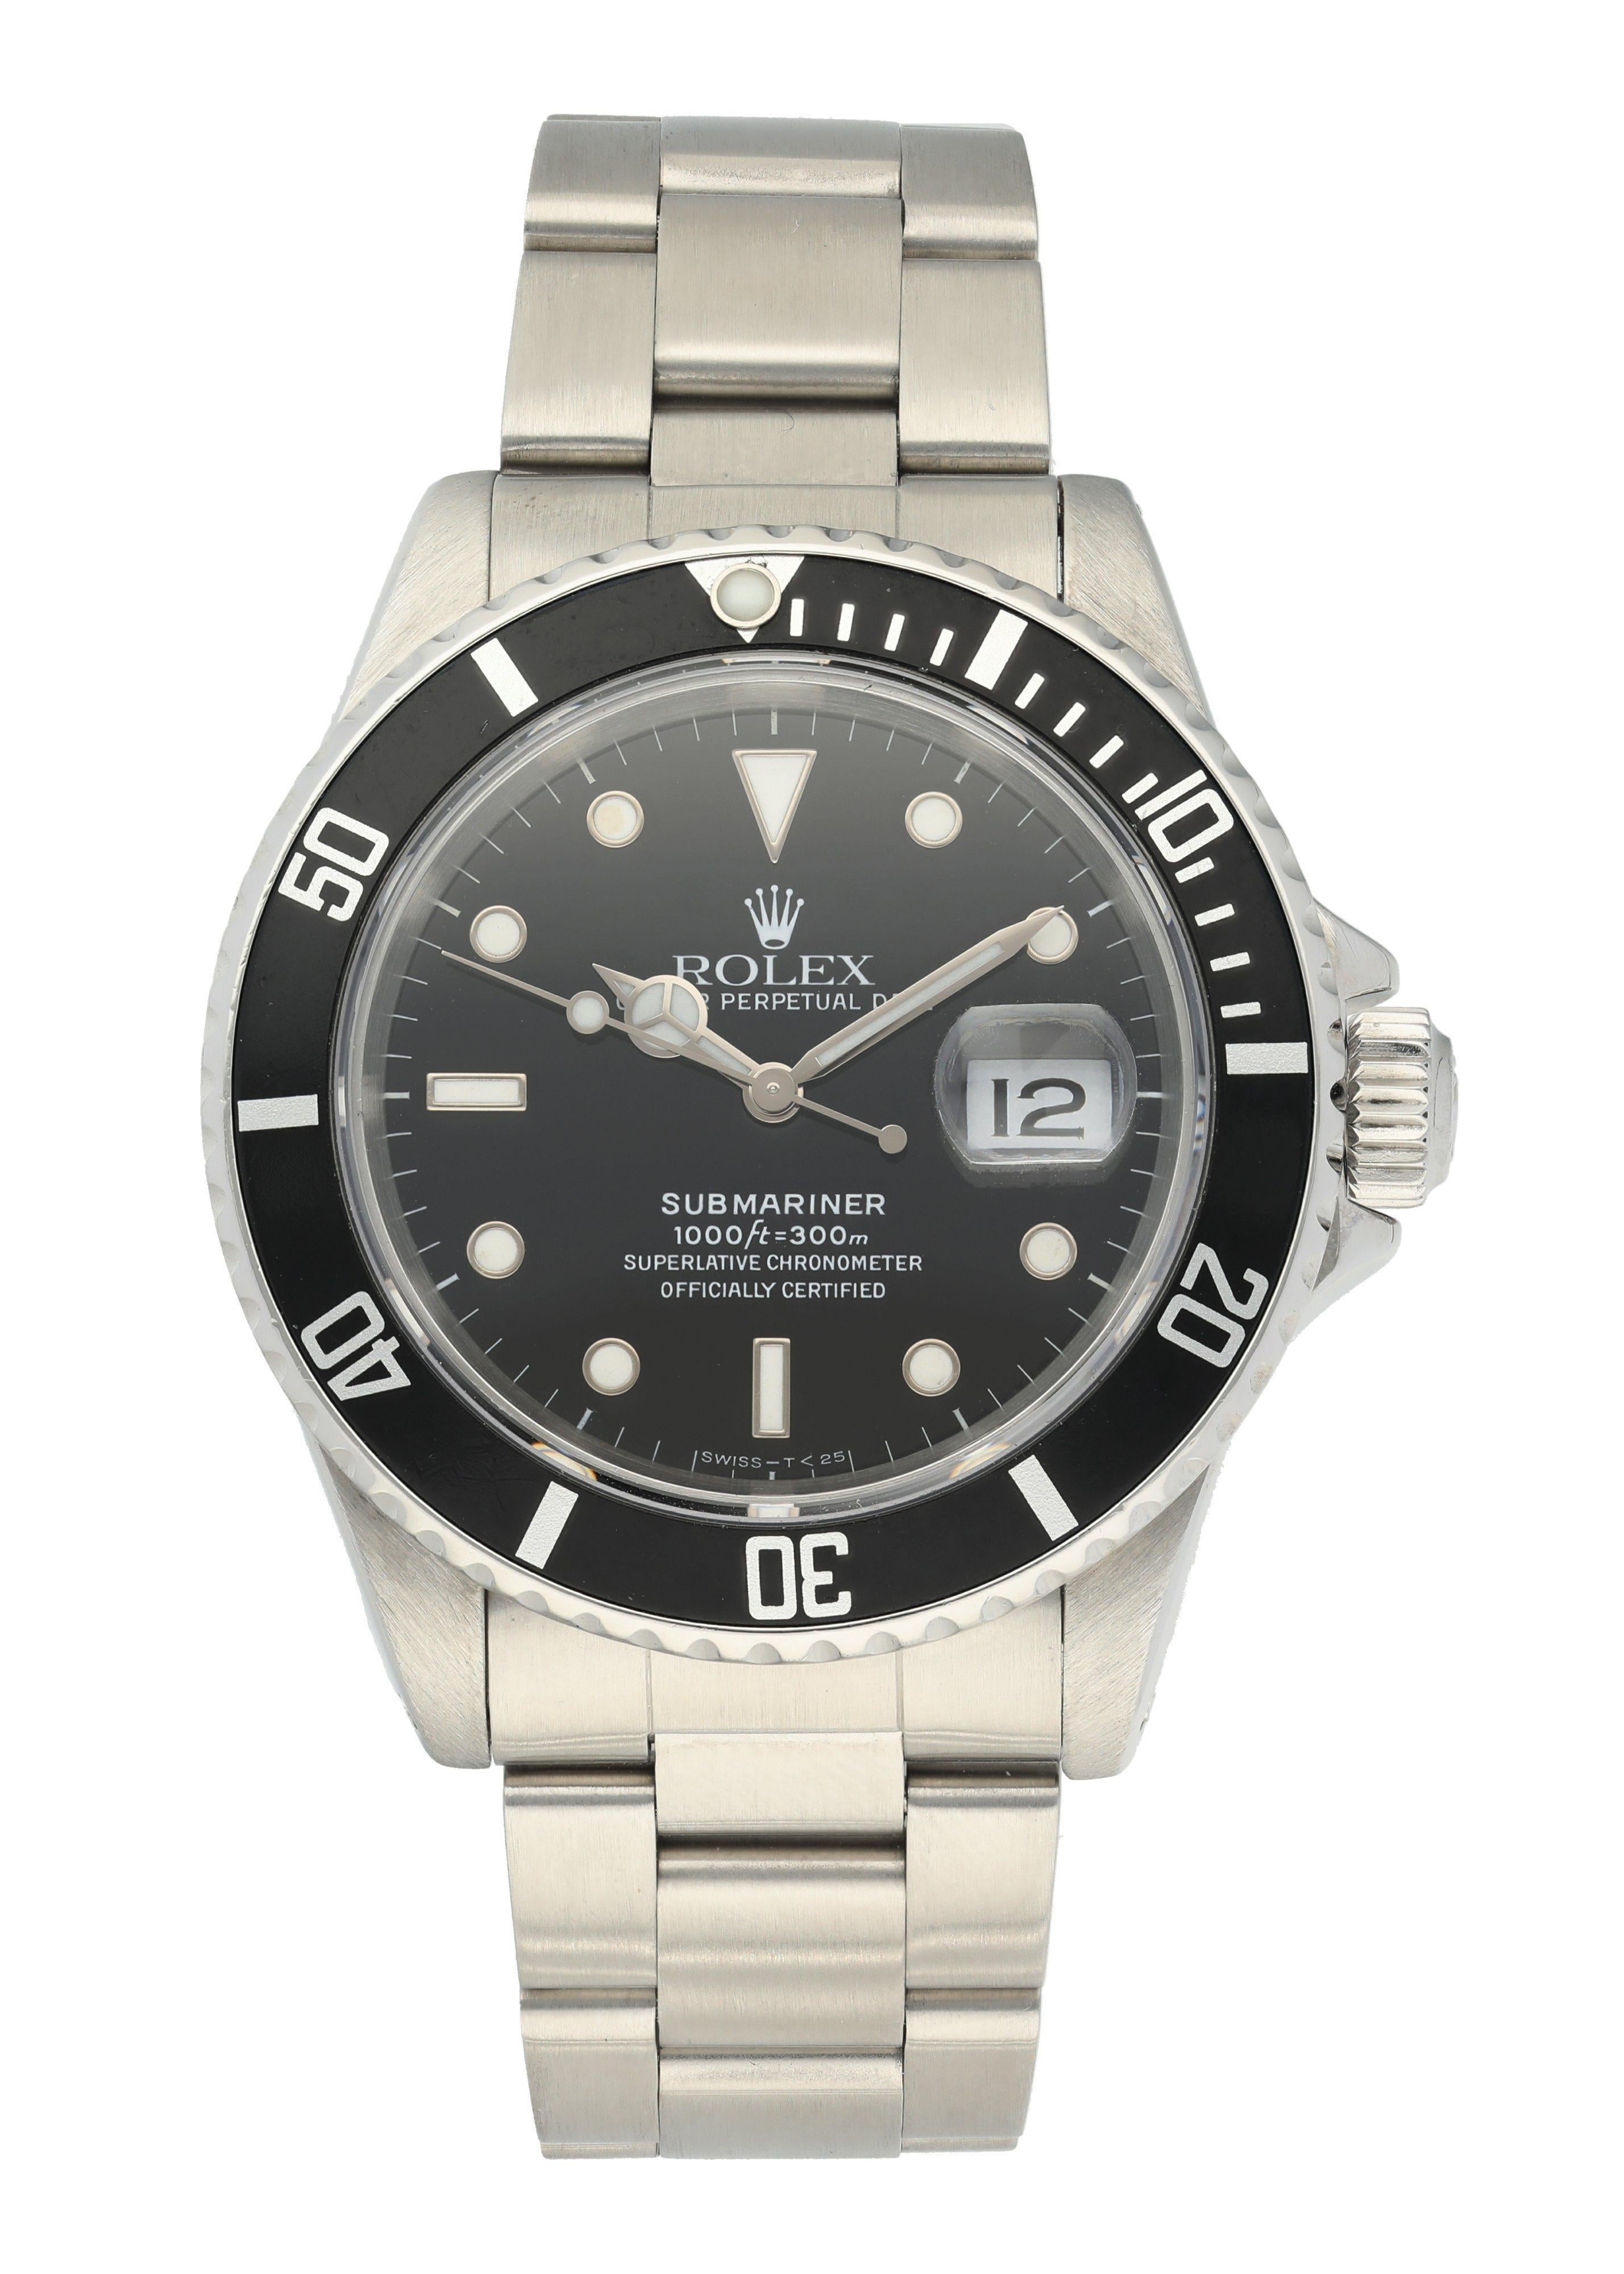 Rolex Submariner Date 16610 Men's Watch. 
42mm Stainless Steel case. 
Stainless Steel Unidirectional rotating bezel. 
Black dial with Luminous Steel hands and luminous dot hour markers. 
Minute markers on the outer dial. 
Date display at the 3